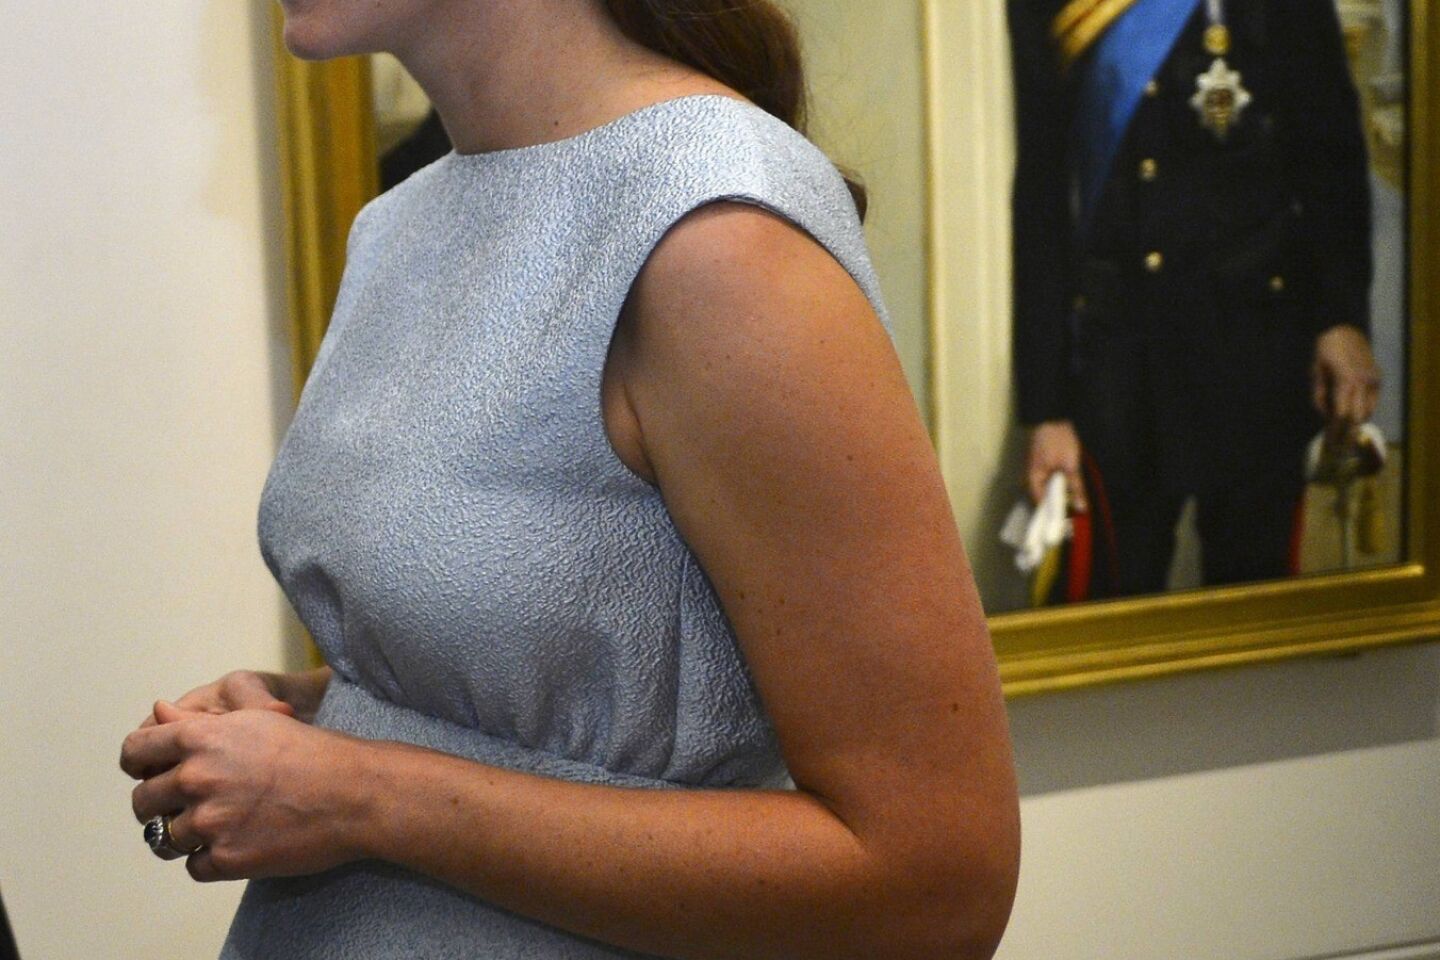 The duchess walks past a painting of Prince William at the National Portrait Gallery in London. The Art Room, for which she is a patron, is a charity offering art as therapy to increase children's self-confidence and independence.